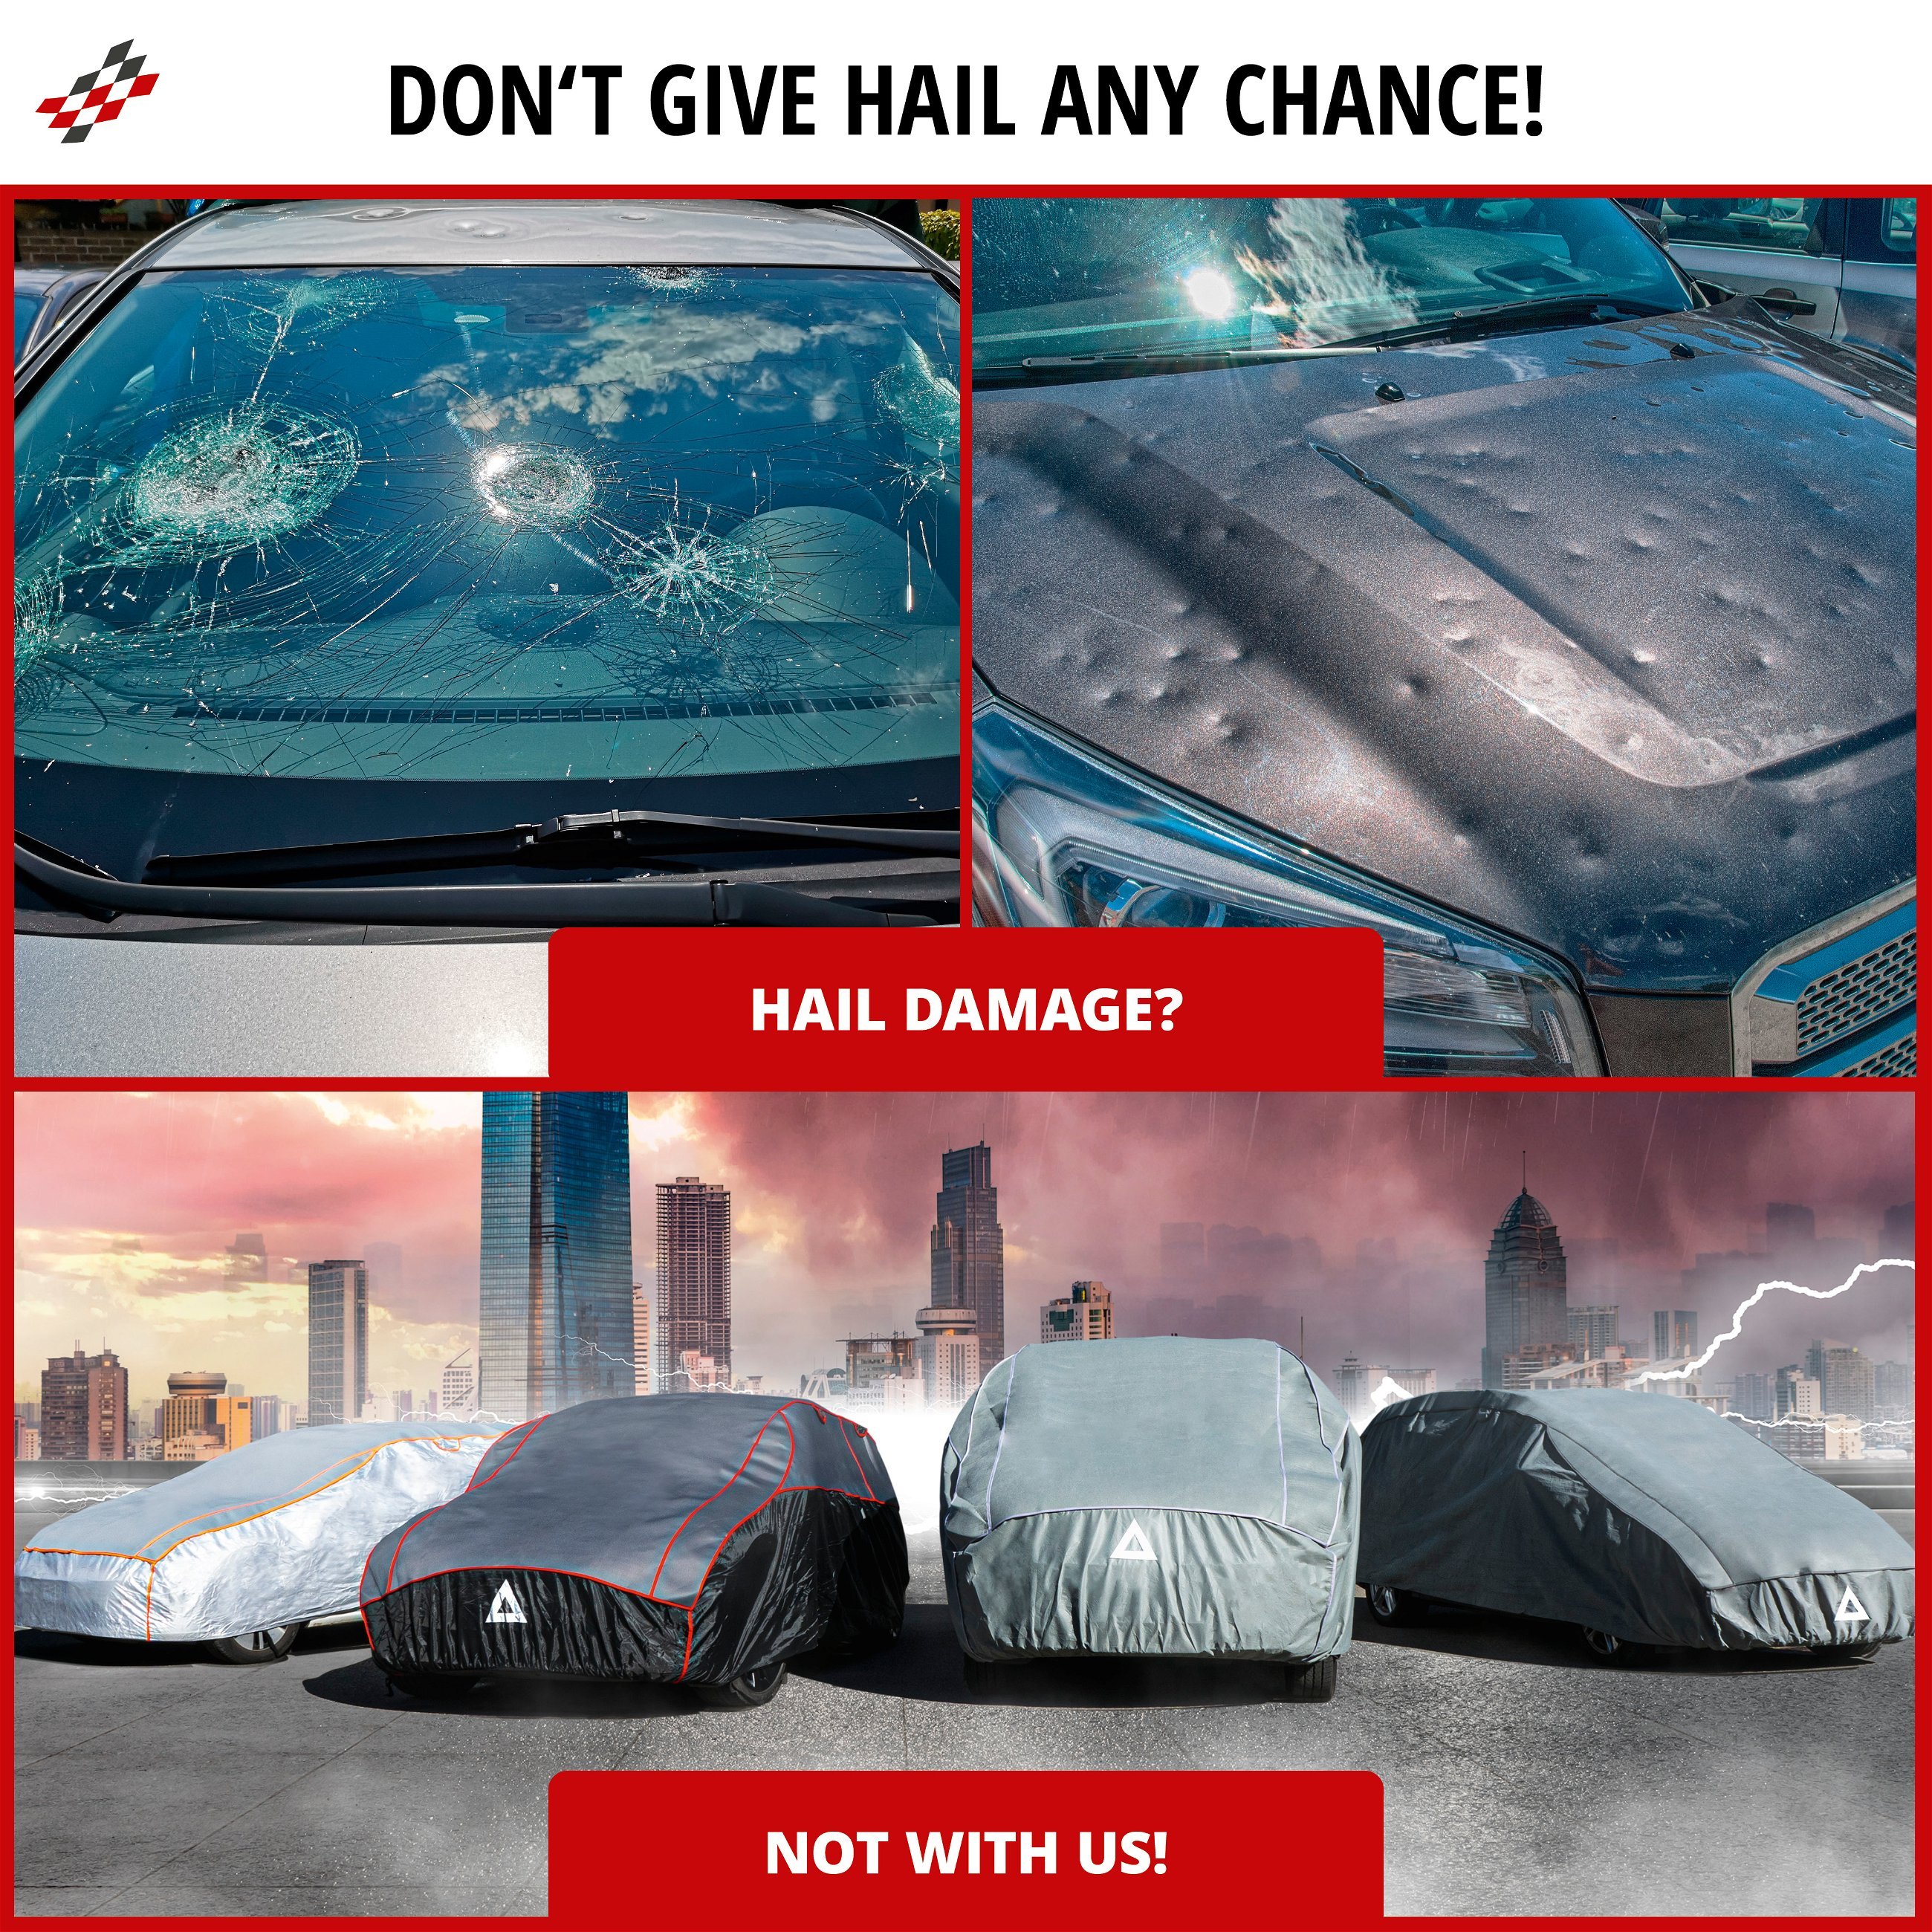 Bus hail protection cover Hybrid UV Protect size XL